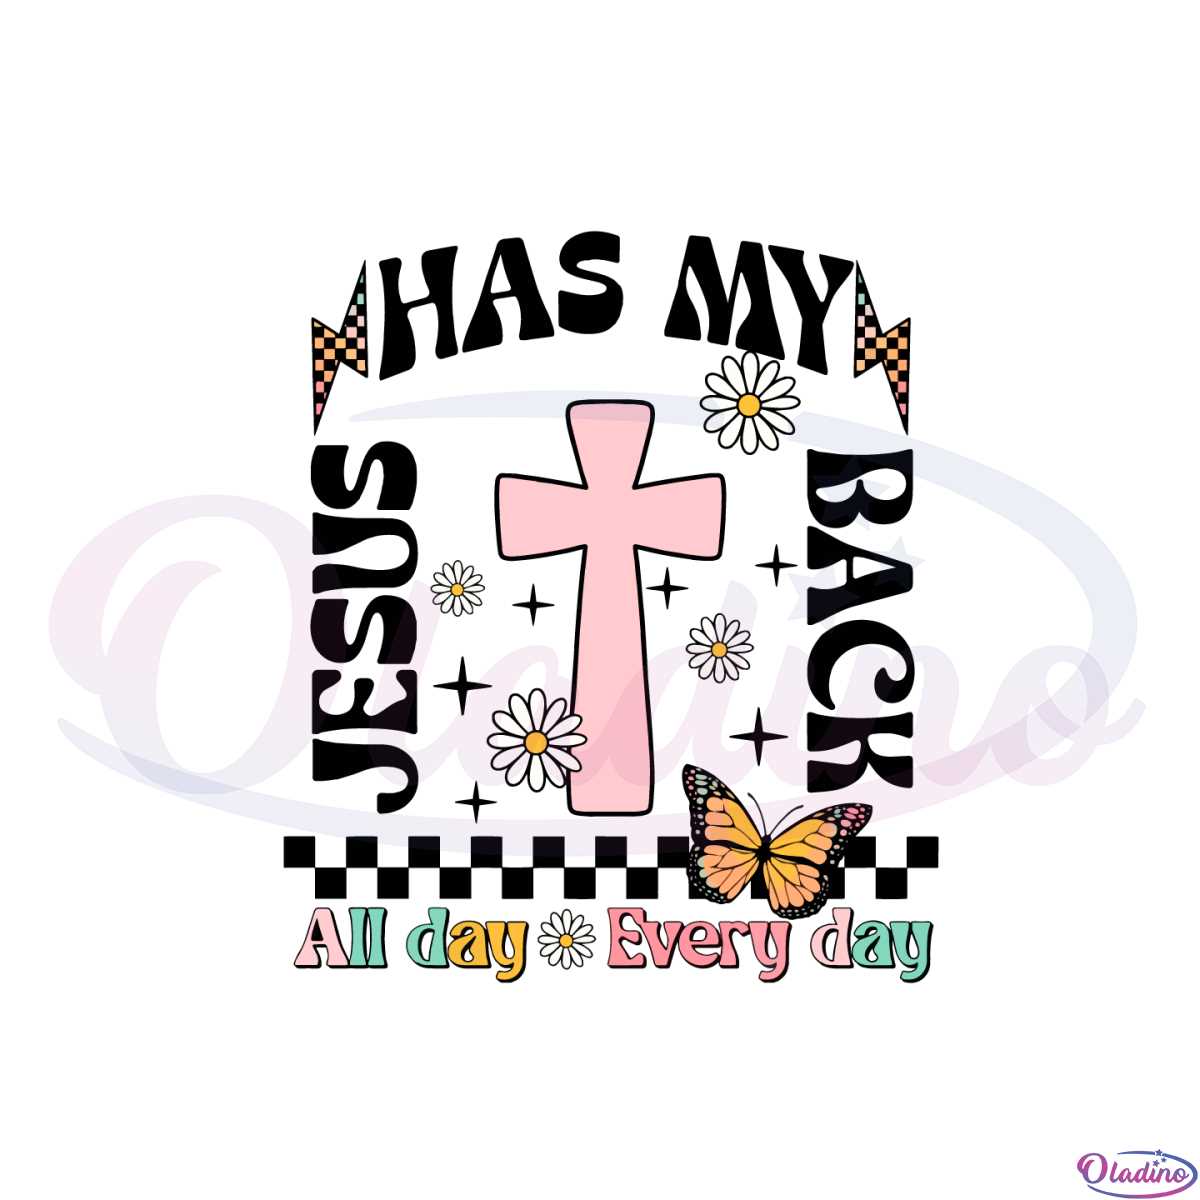 retro-jesus-has-my-back-all-day-every-day-svg-graphic-designs-files